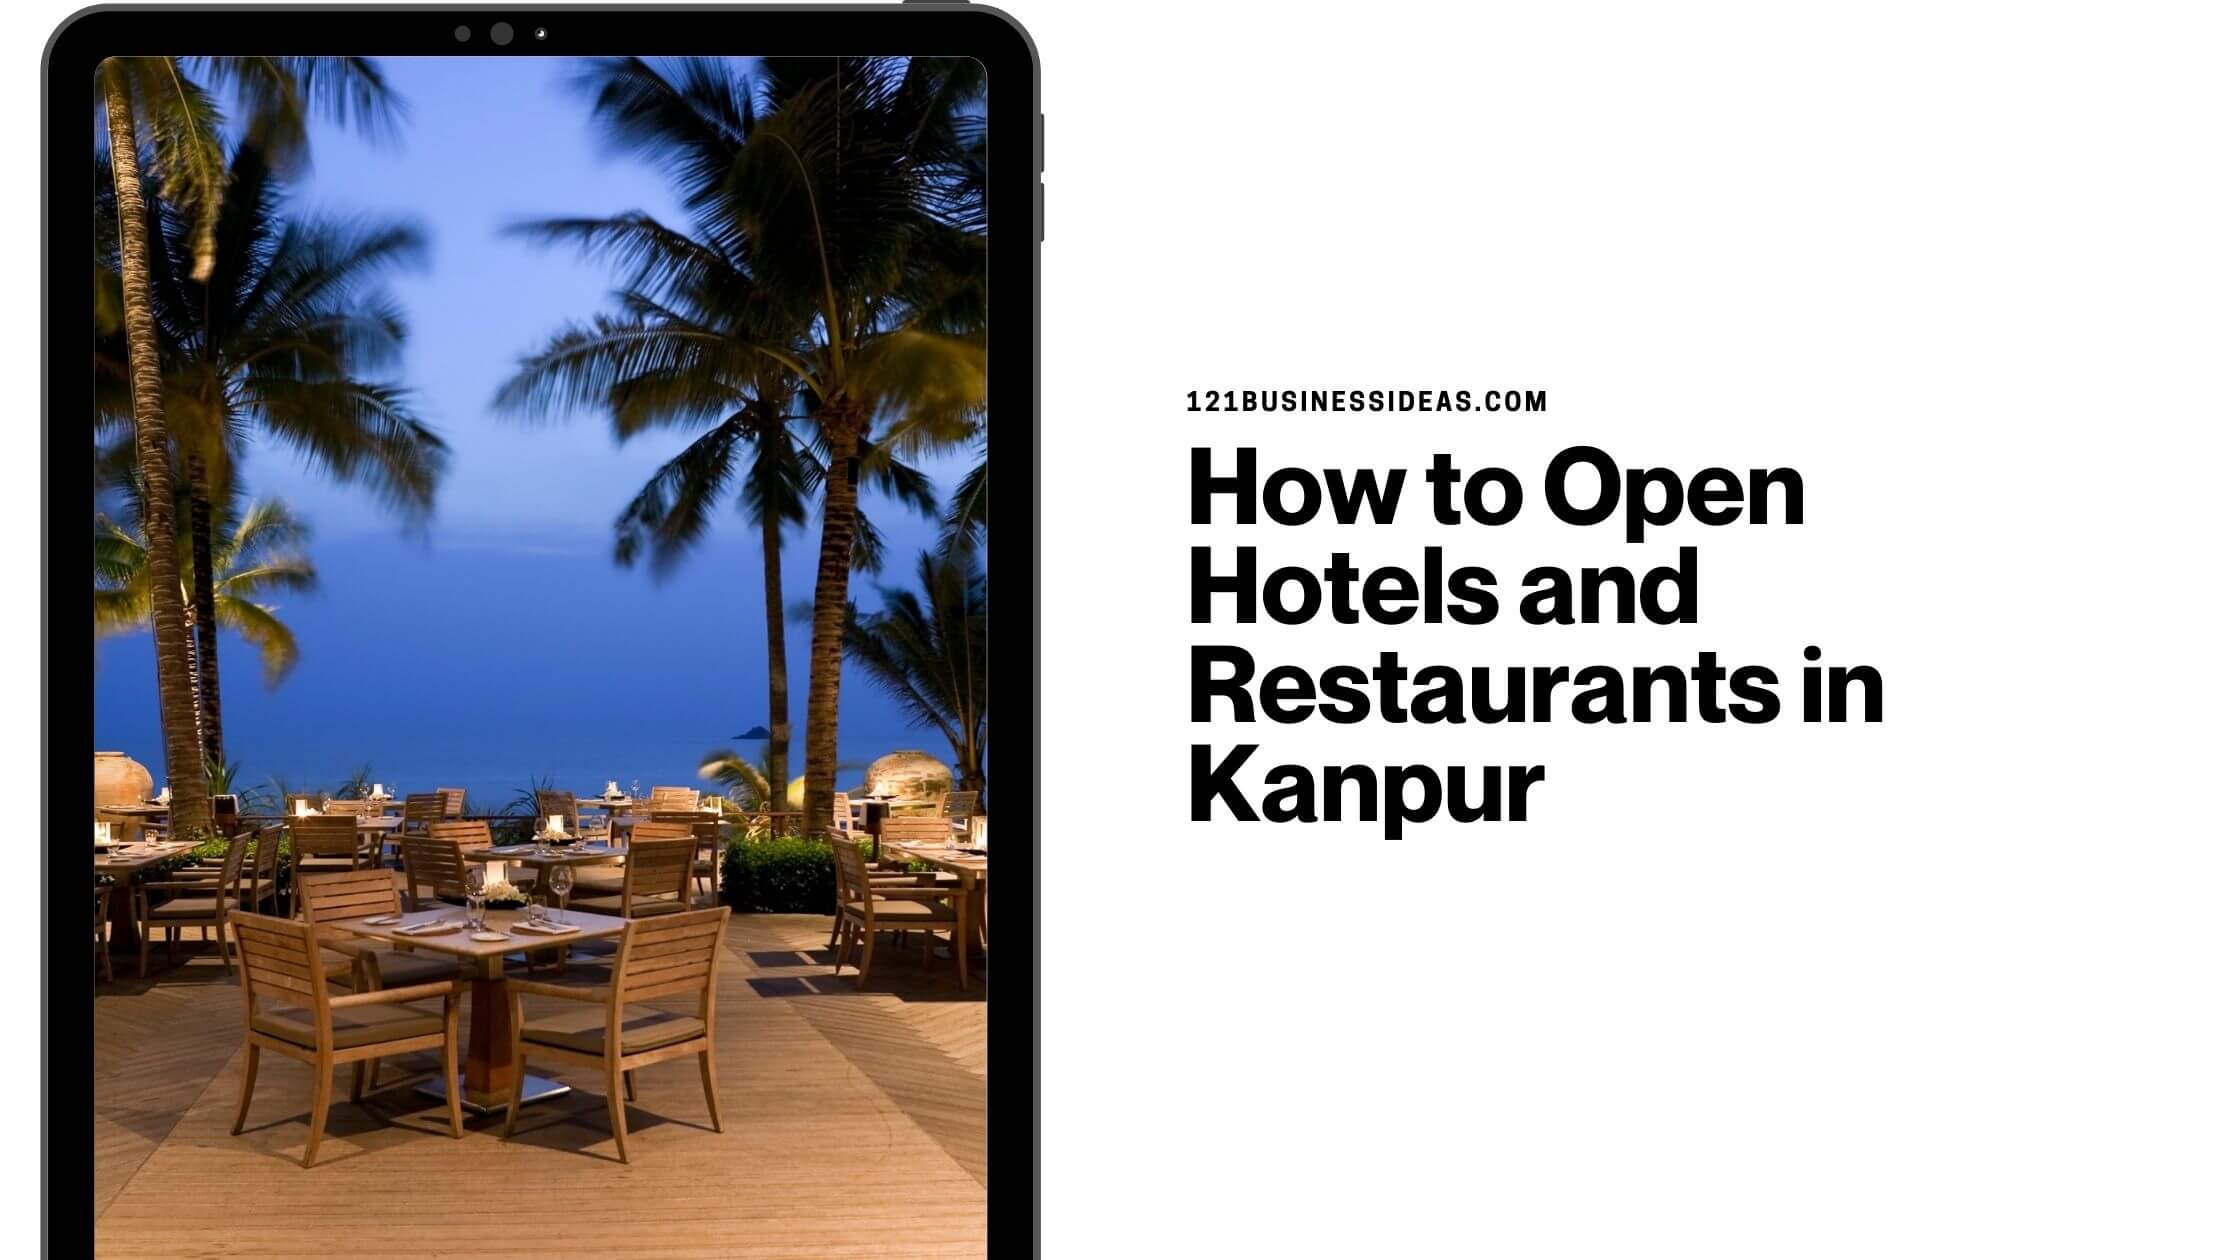 How to Open Hotels and Restaurants in Kanpur (1)